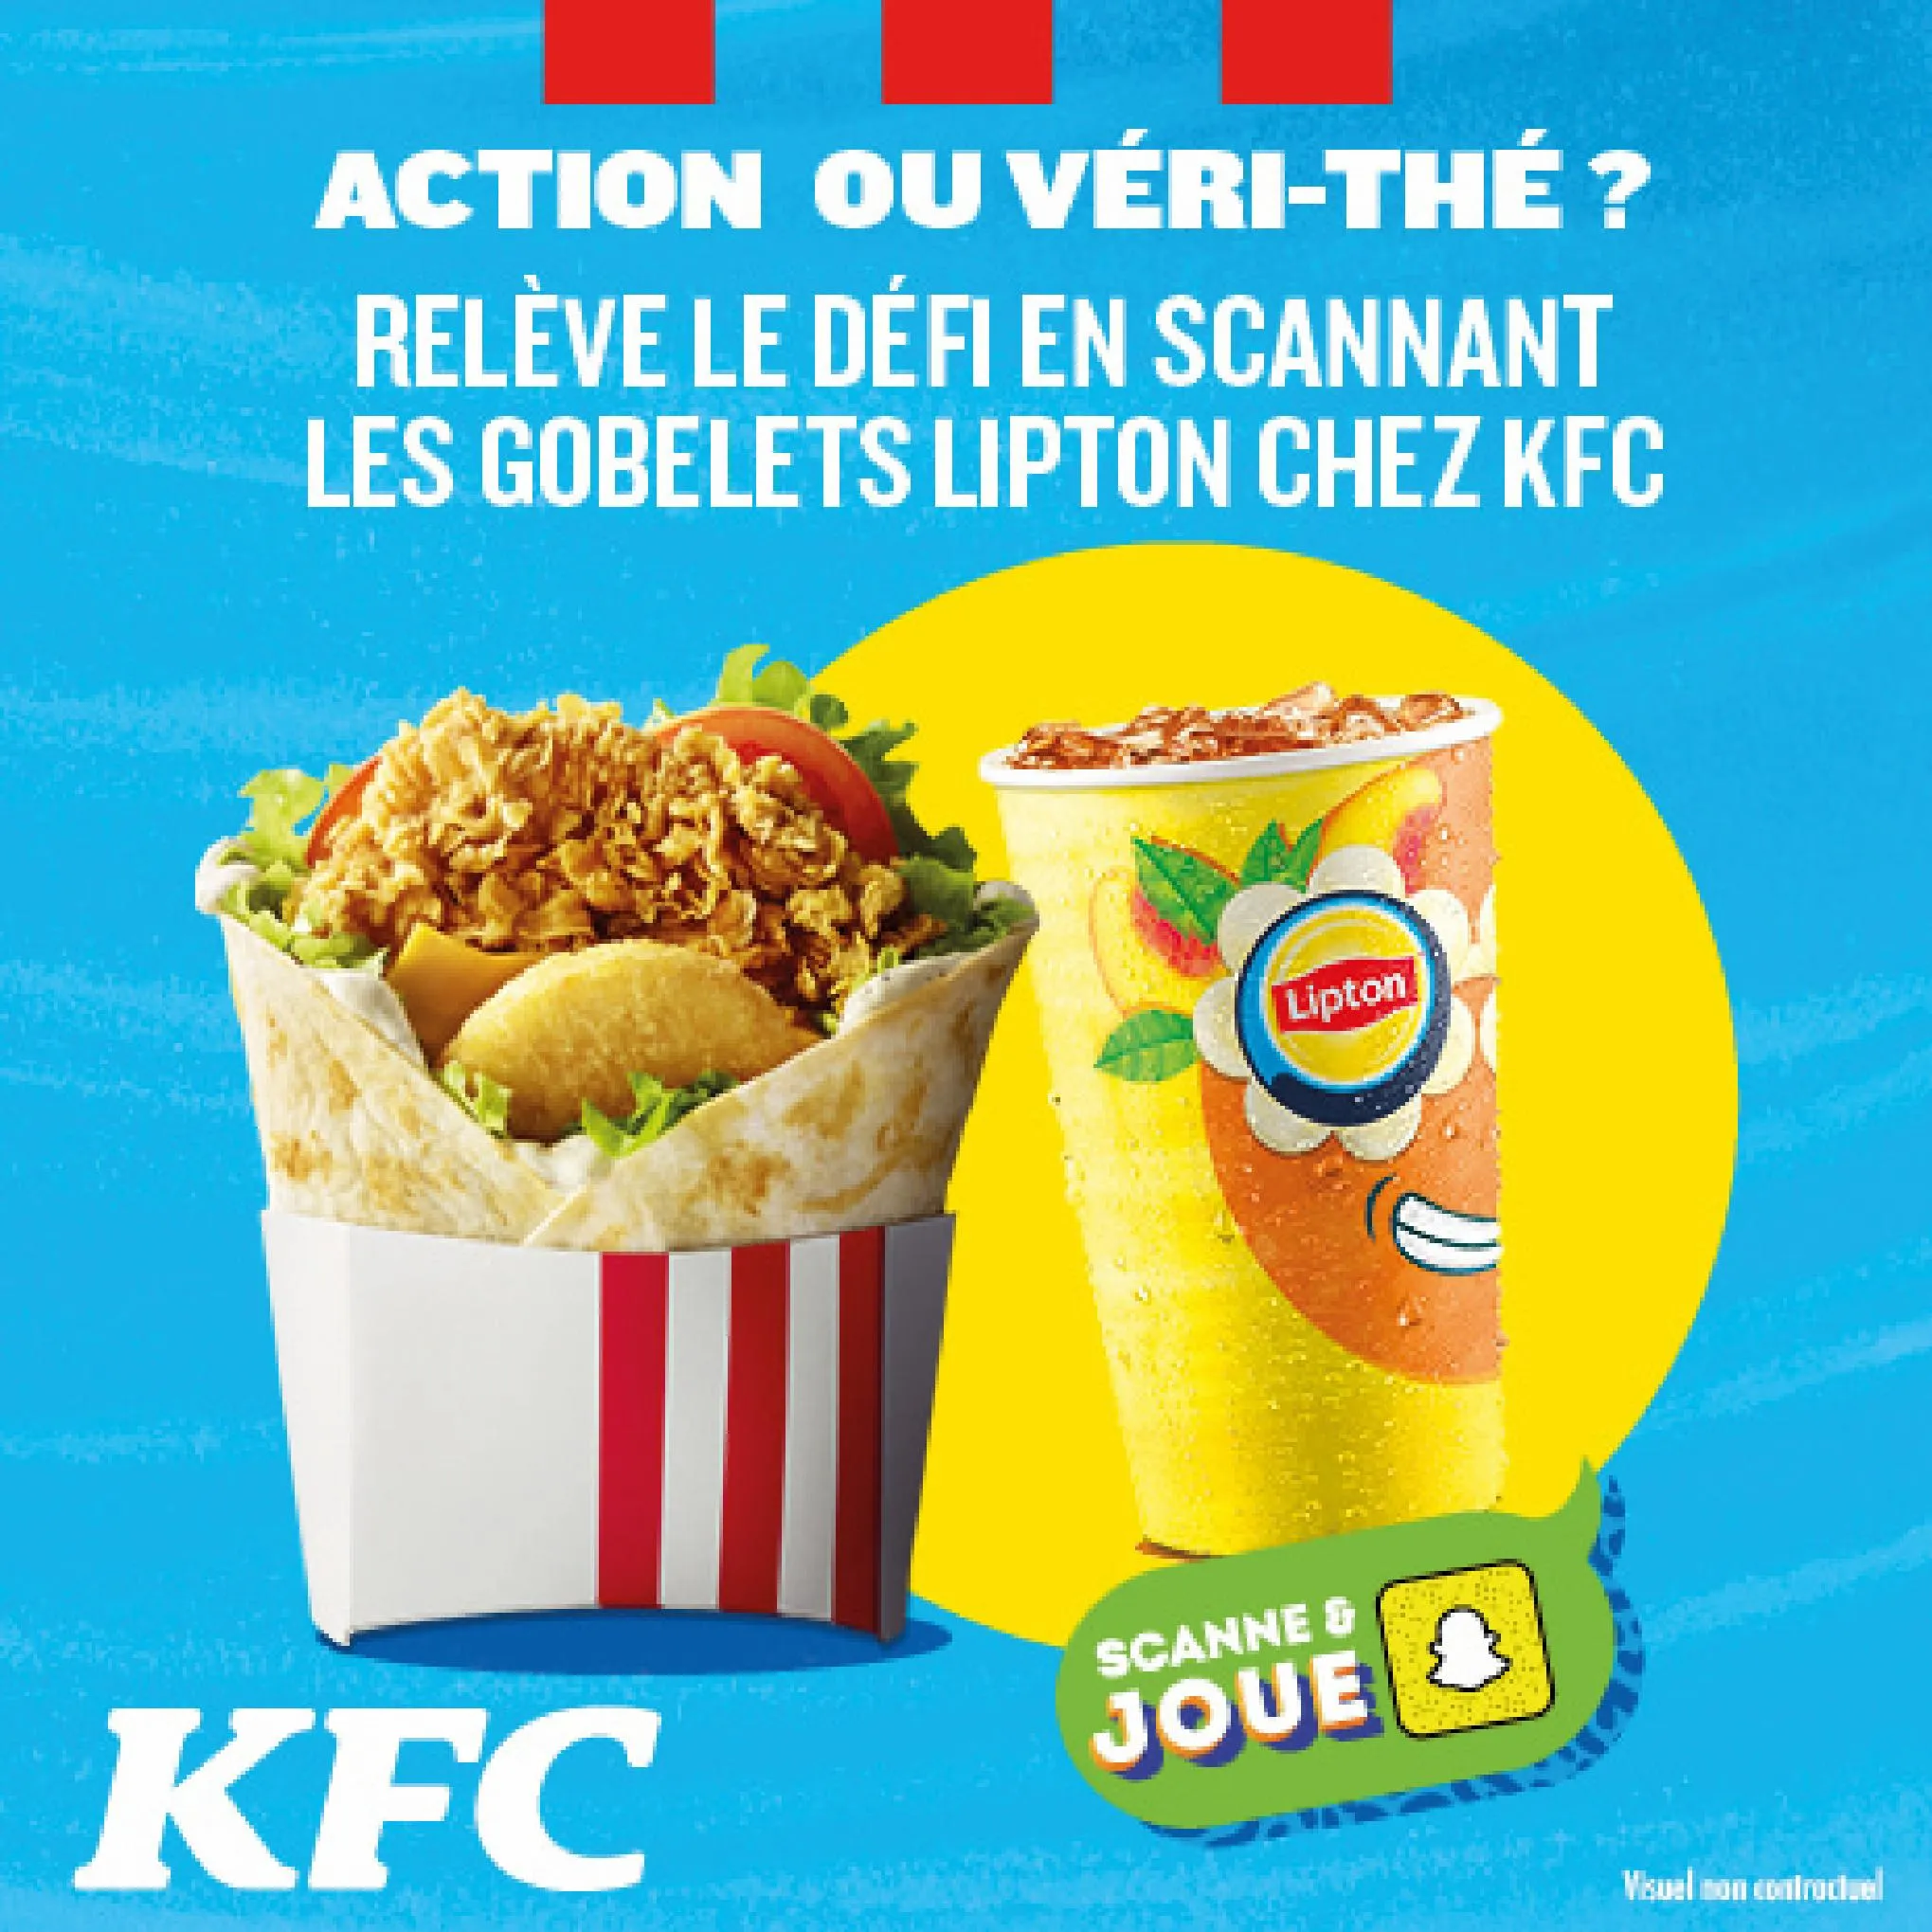 Catalogue KFC Offres Speciales!, page 00005